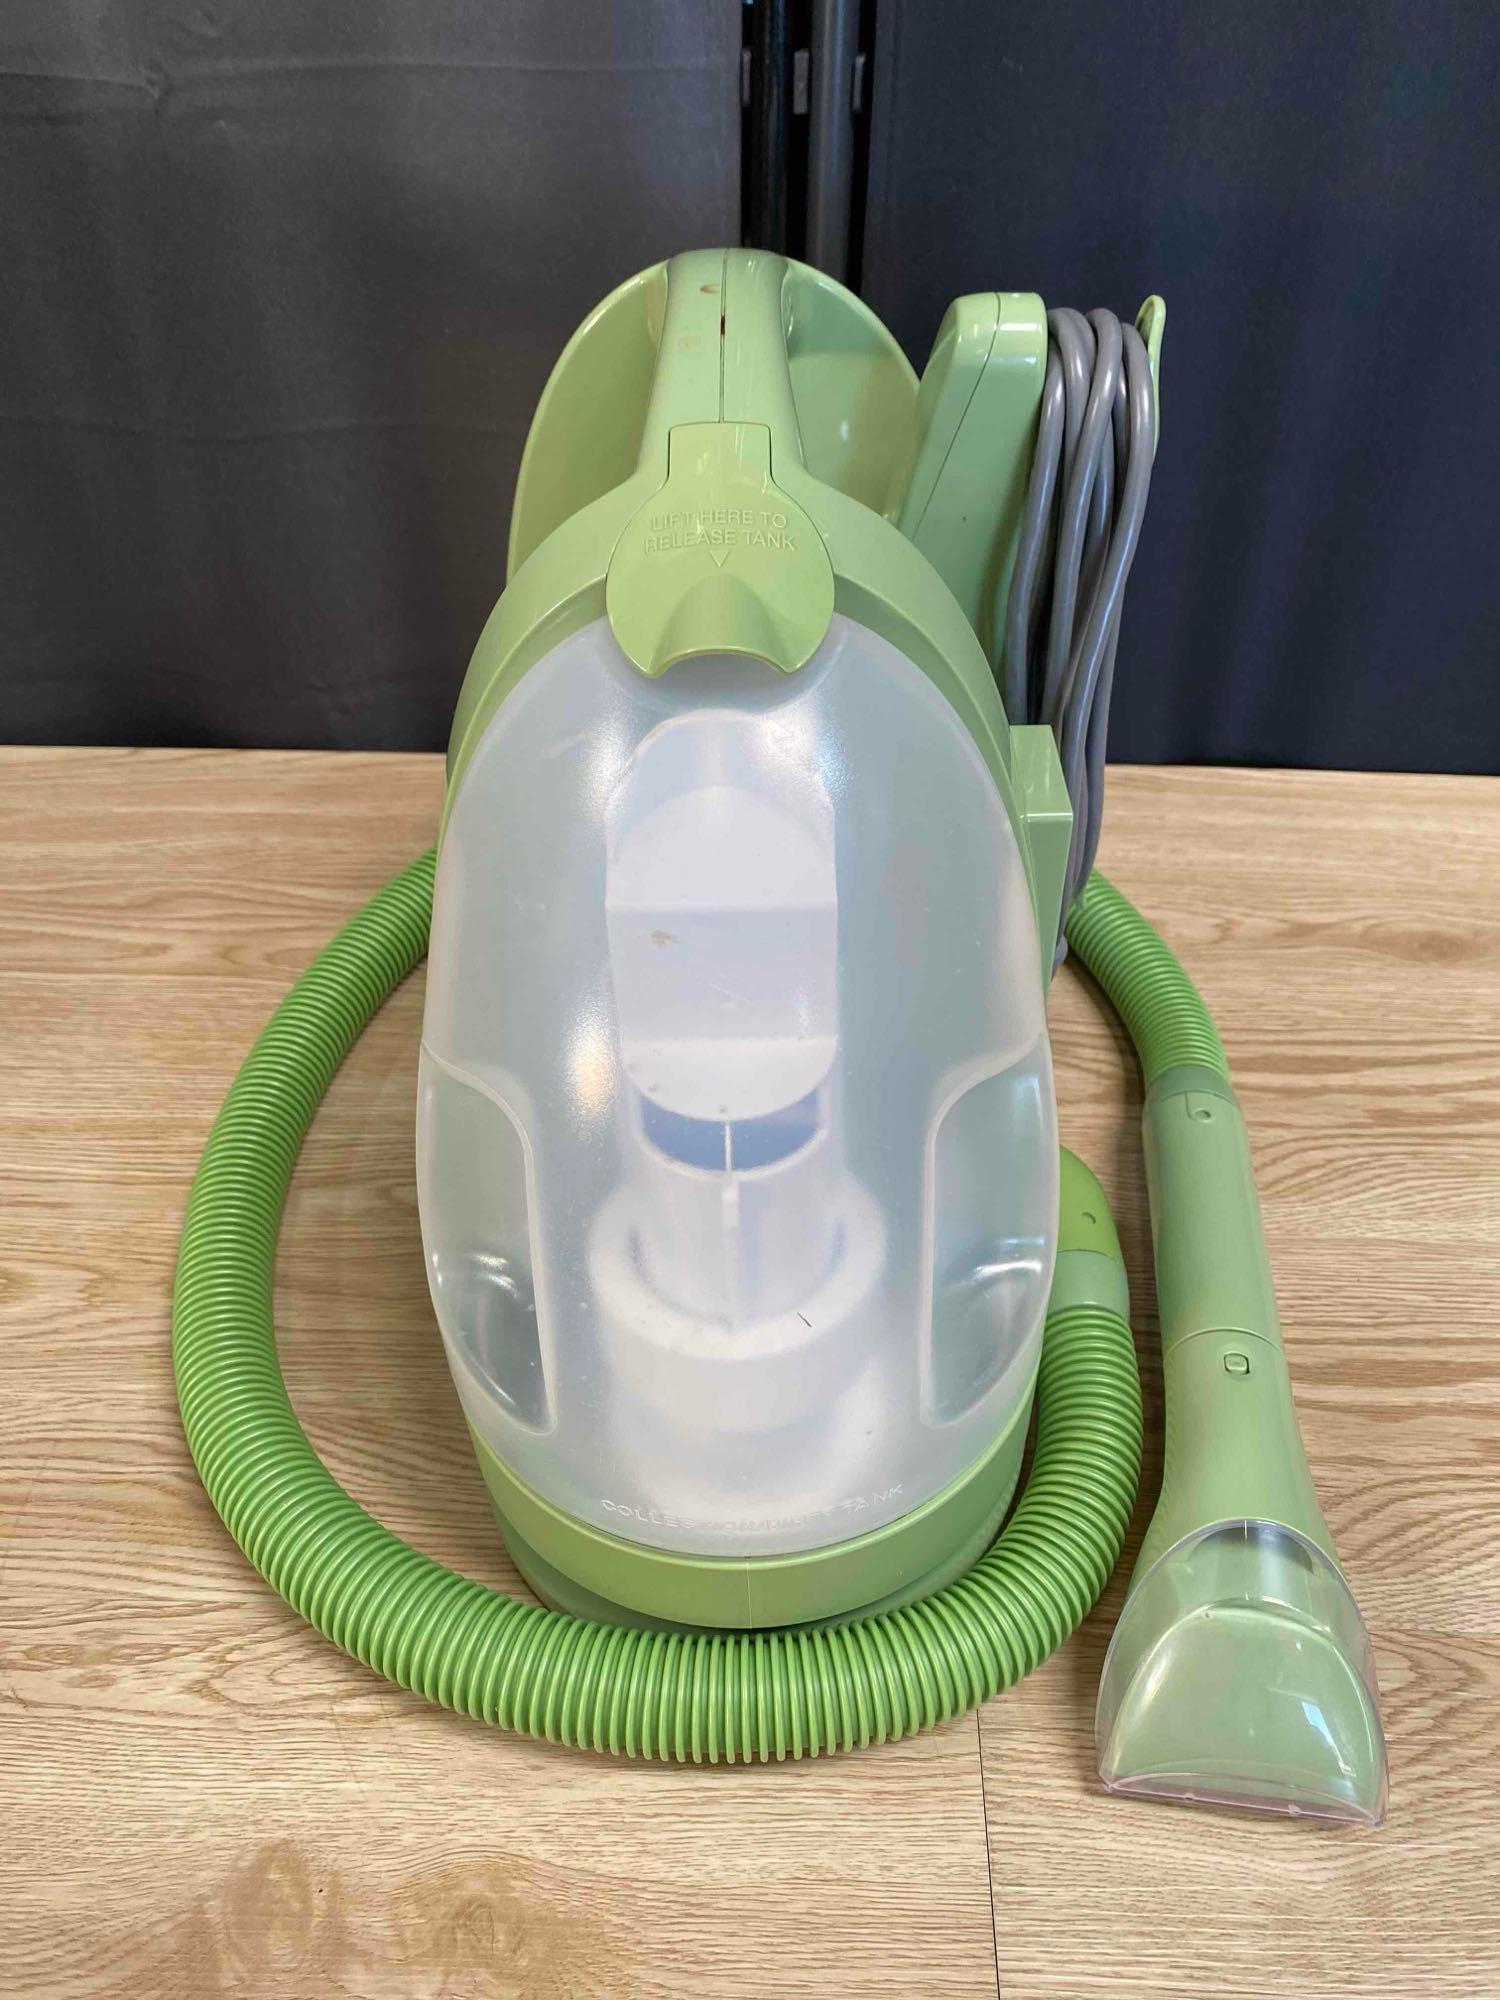 Bissell Little Green Portable Carpet Cleaner